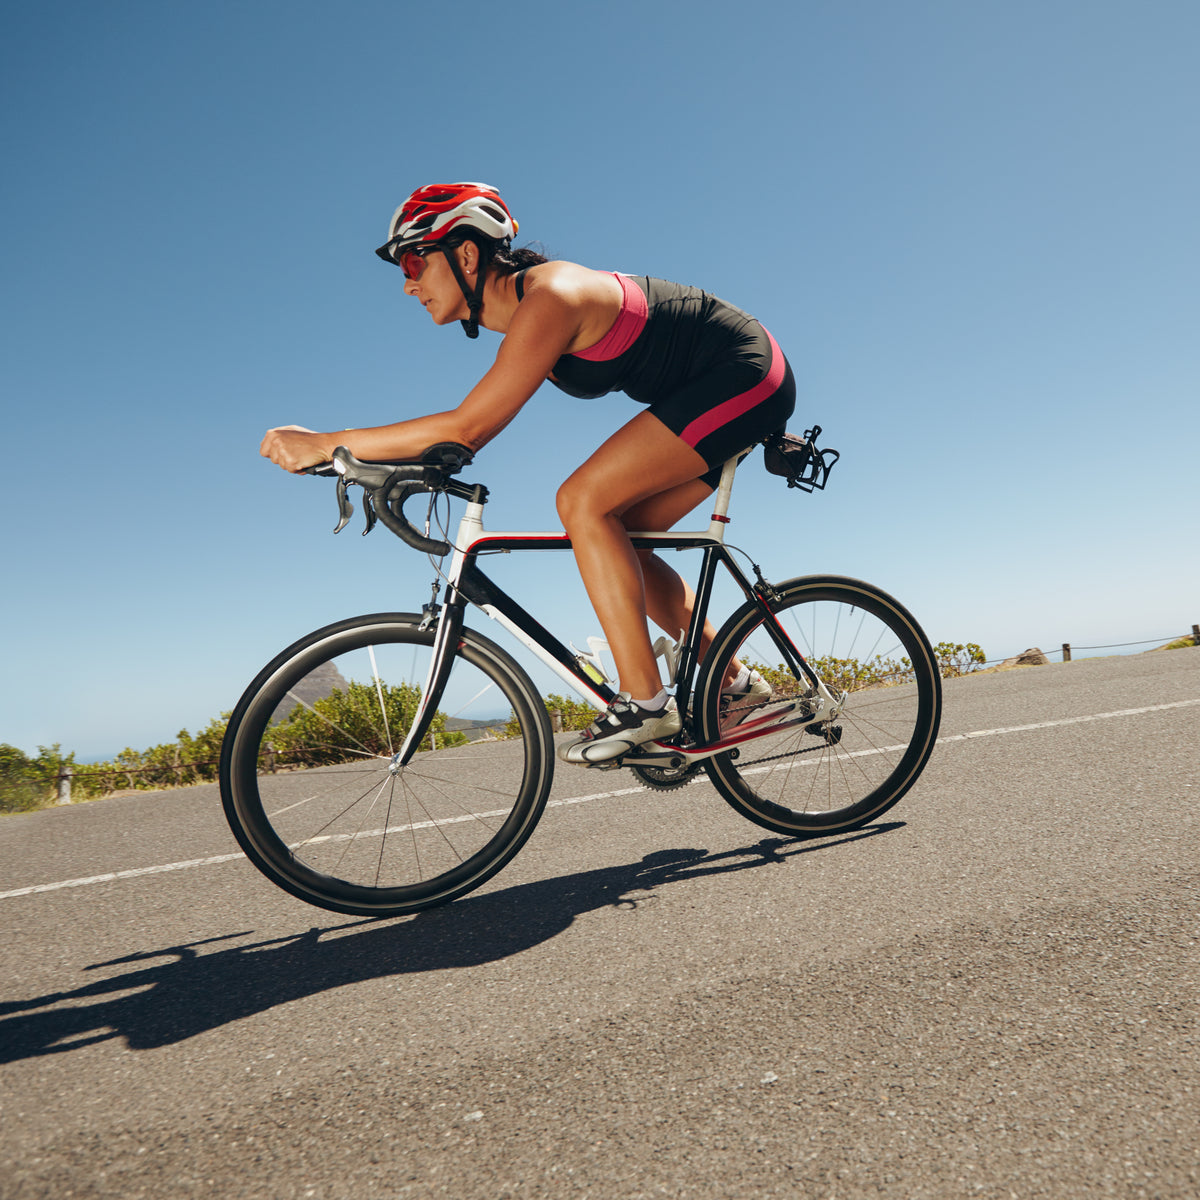 Best Conditioning Exercises For Cyclists